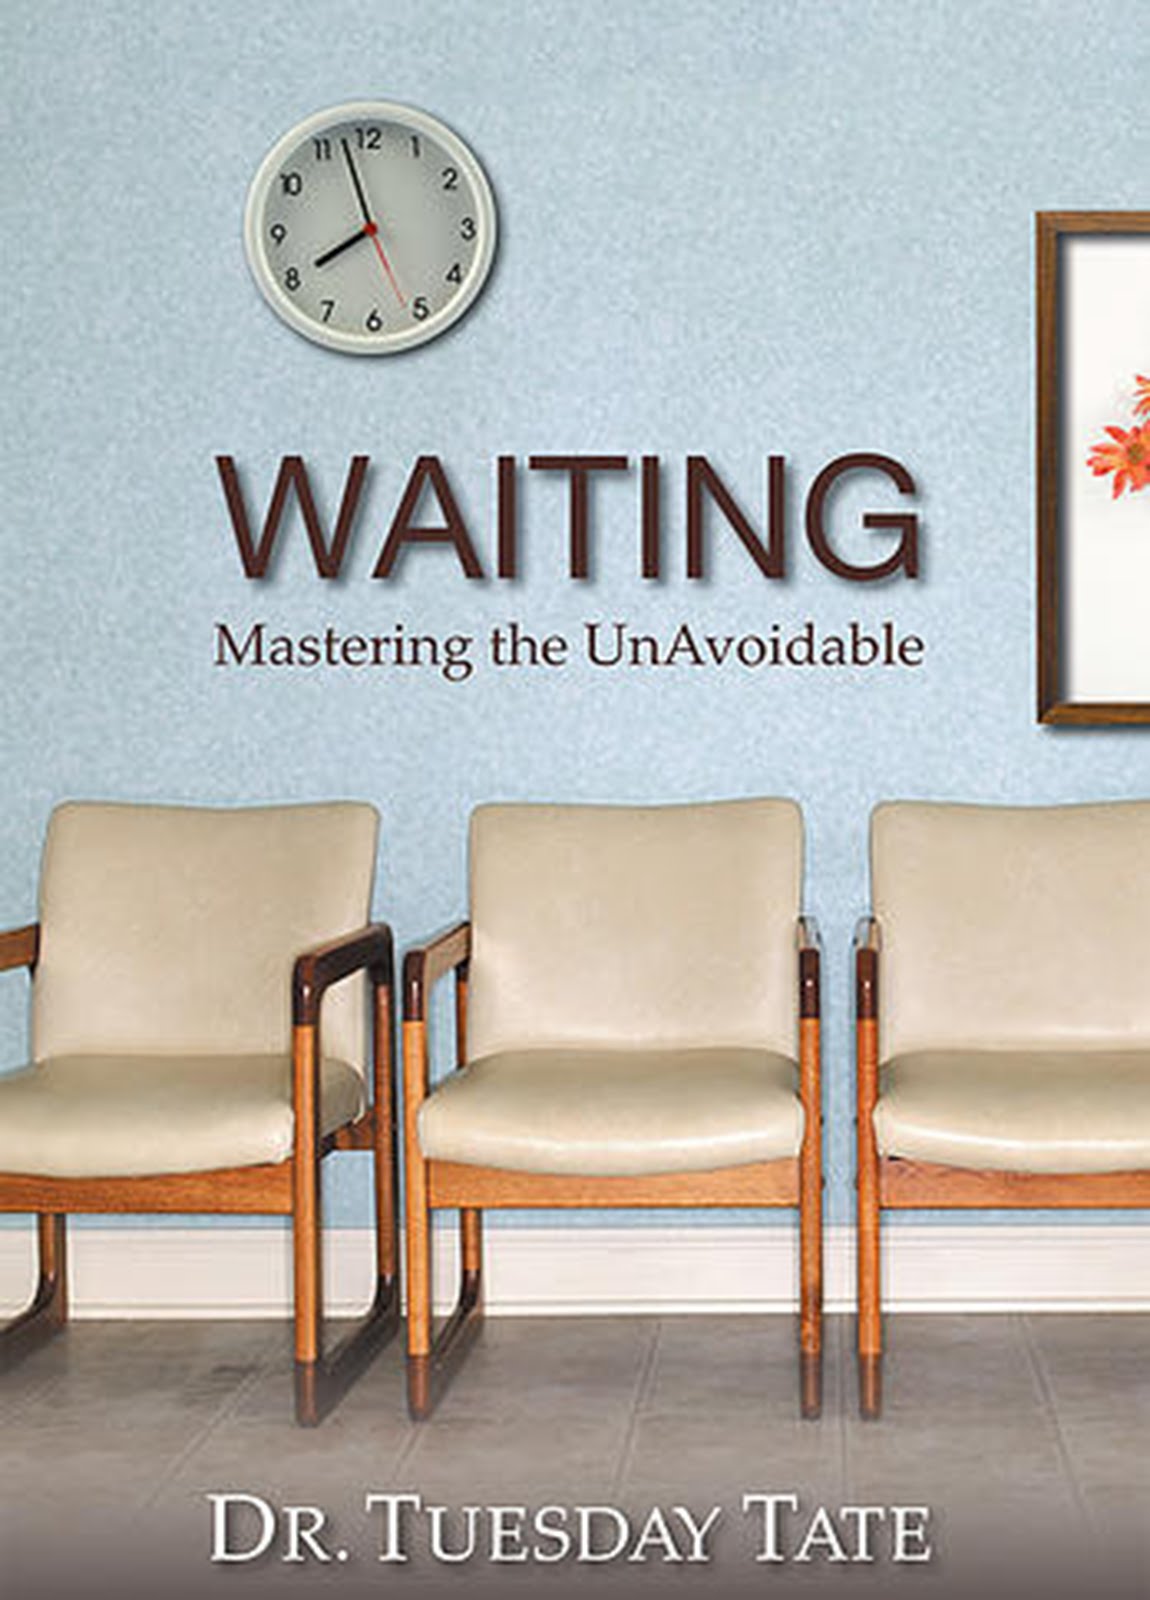 WAITING: Mastering the UnAvoidable